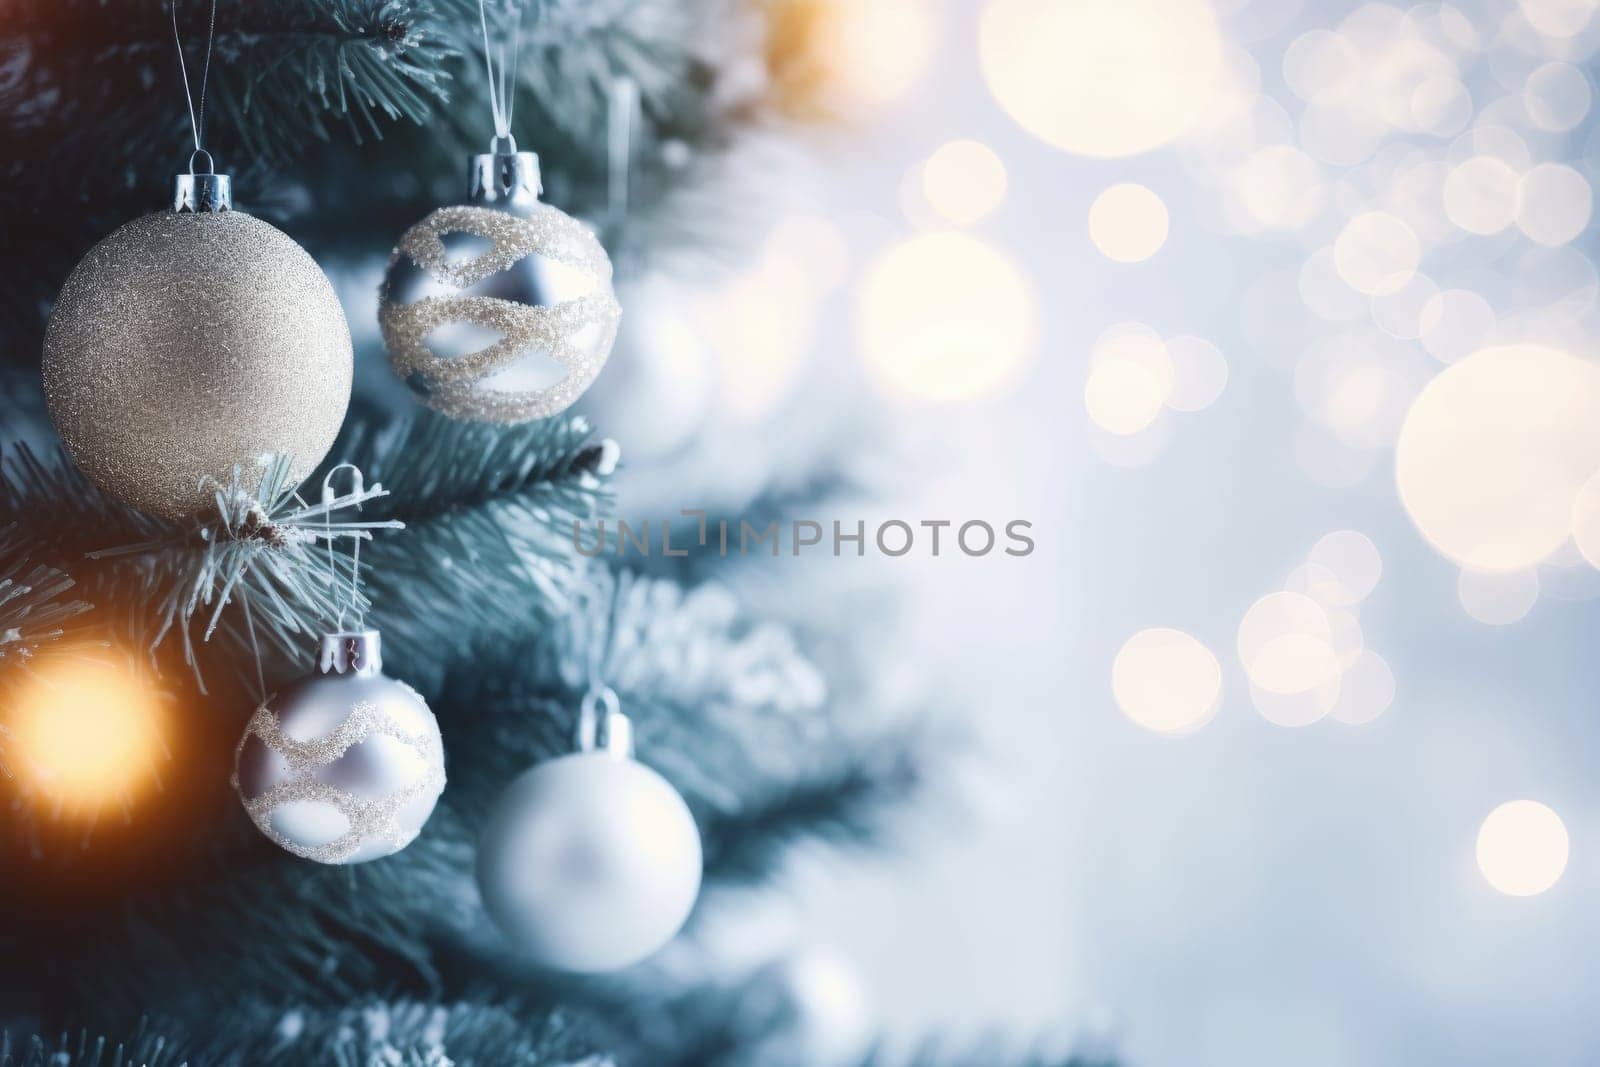 Christmas and New Years Eve background. Holiday background with Christmas baubles on fir tree with highlights and soft bokeh background. Template with text area for designing posters, web banners etc